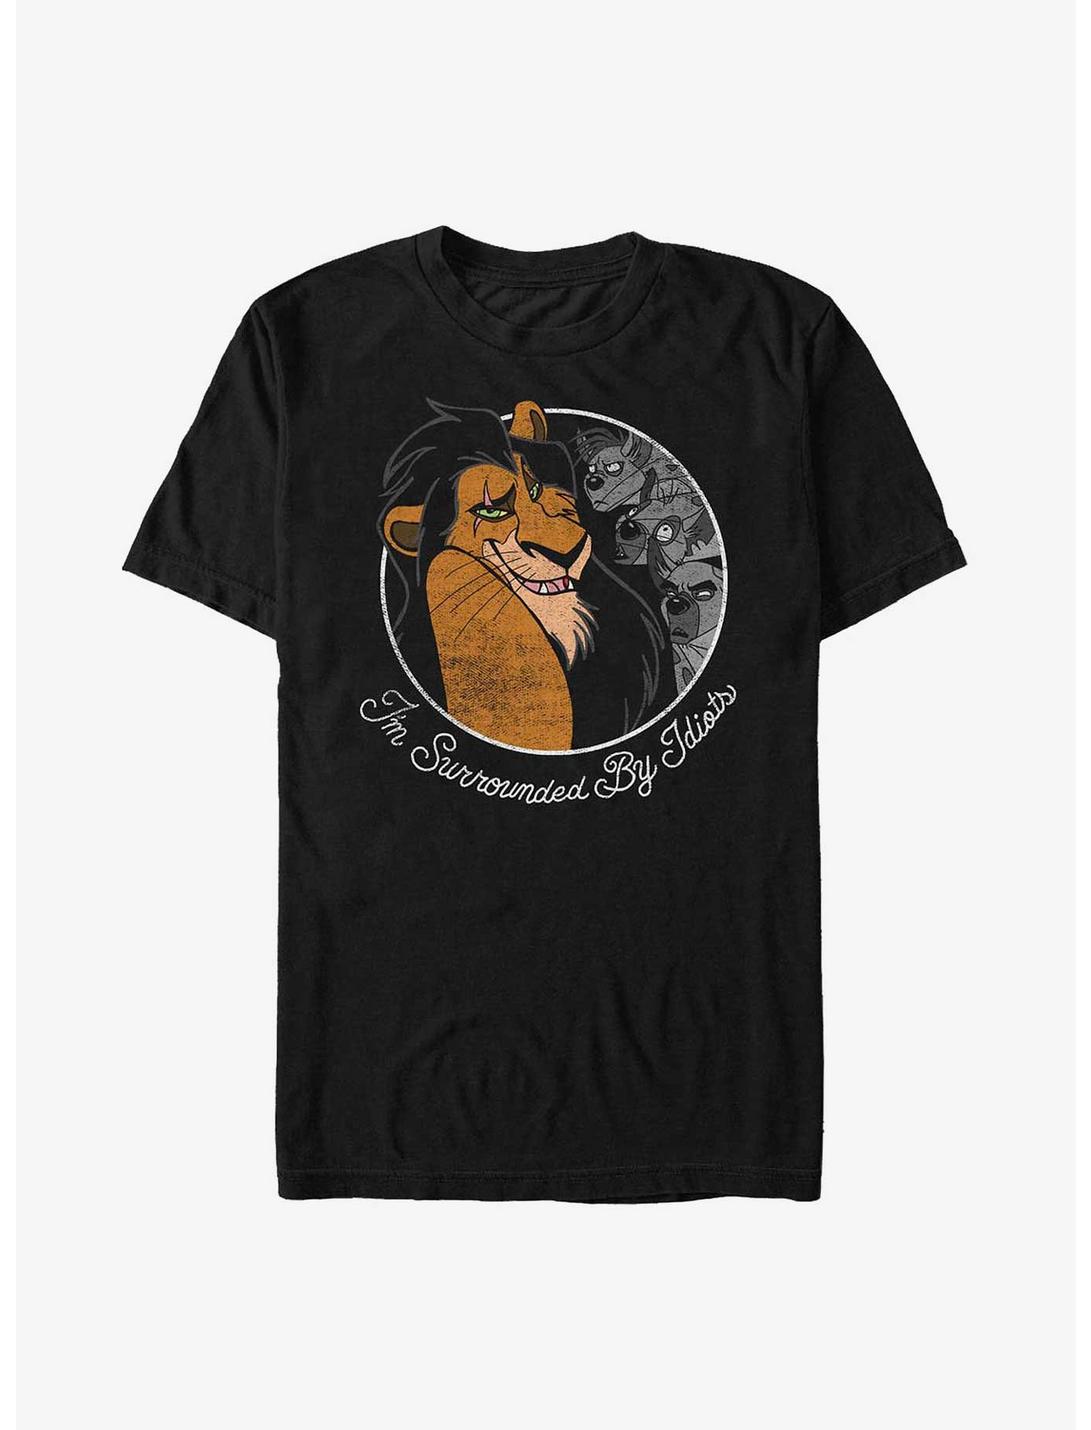 Disney The Lion King Scar Surrounded By Idiots T-Shirt, BLACK, hi-res